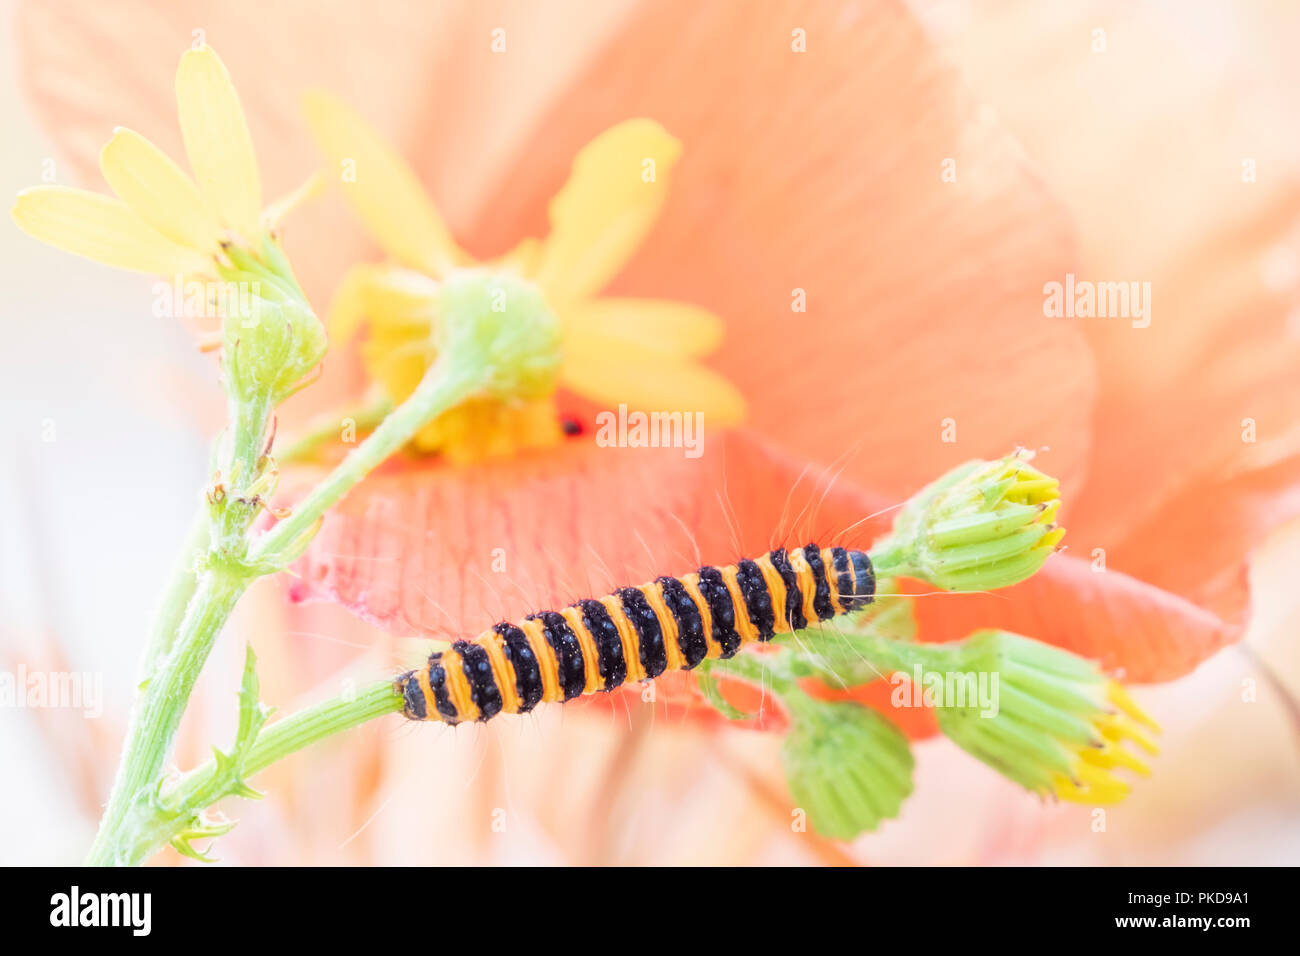 colorful close up shot of a black yellow striped caterpillar among the flowers and plants Stock Photo